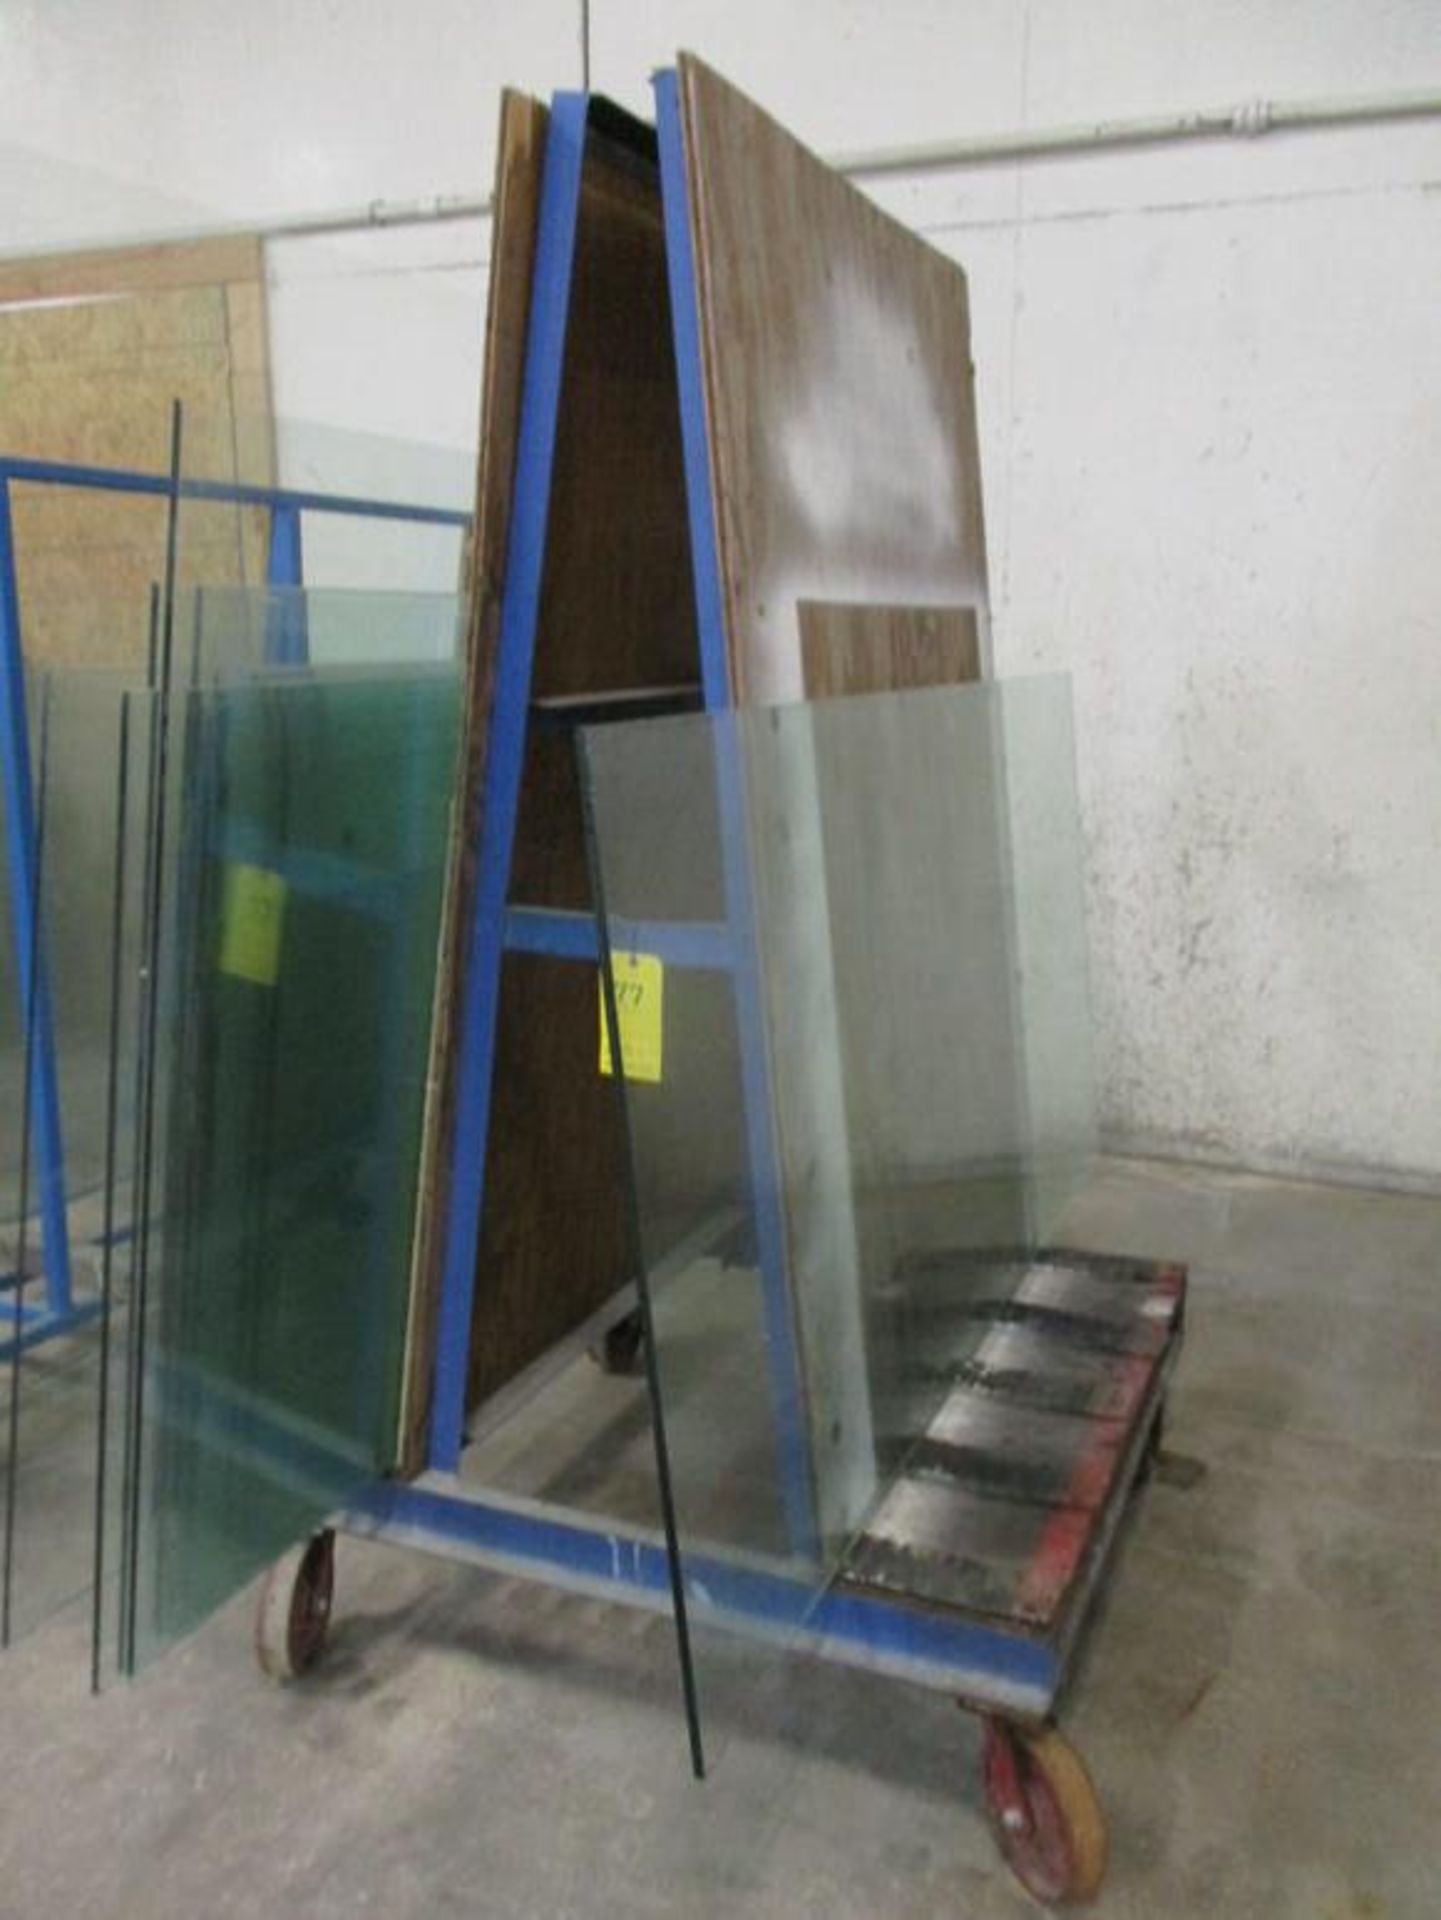 PORTABLE DOUBLE SIDED METAL GLASS RACK, APPROX 5' X 5' X 7' W/ (16) VAR SIZE GLASS - Image 2 of 4